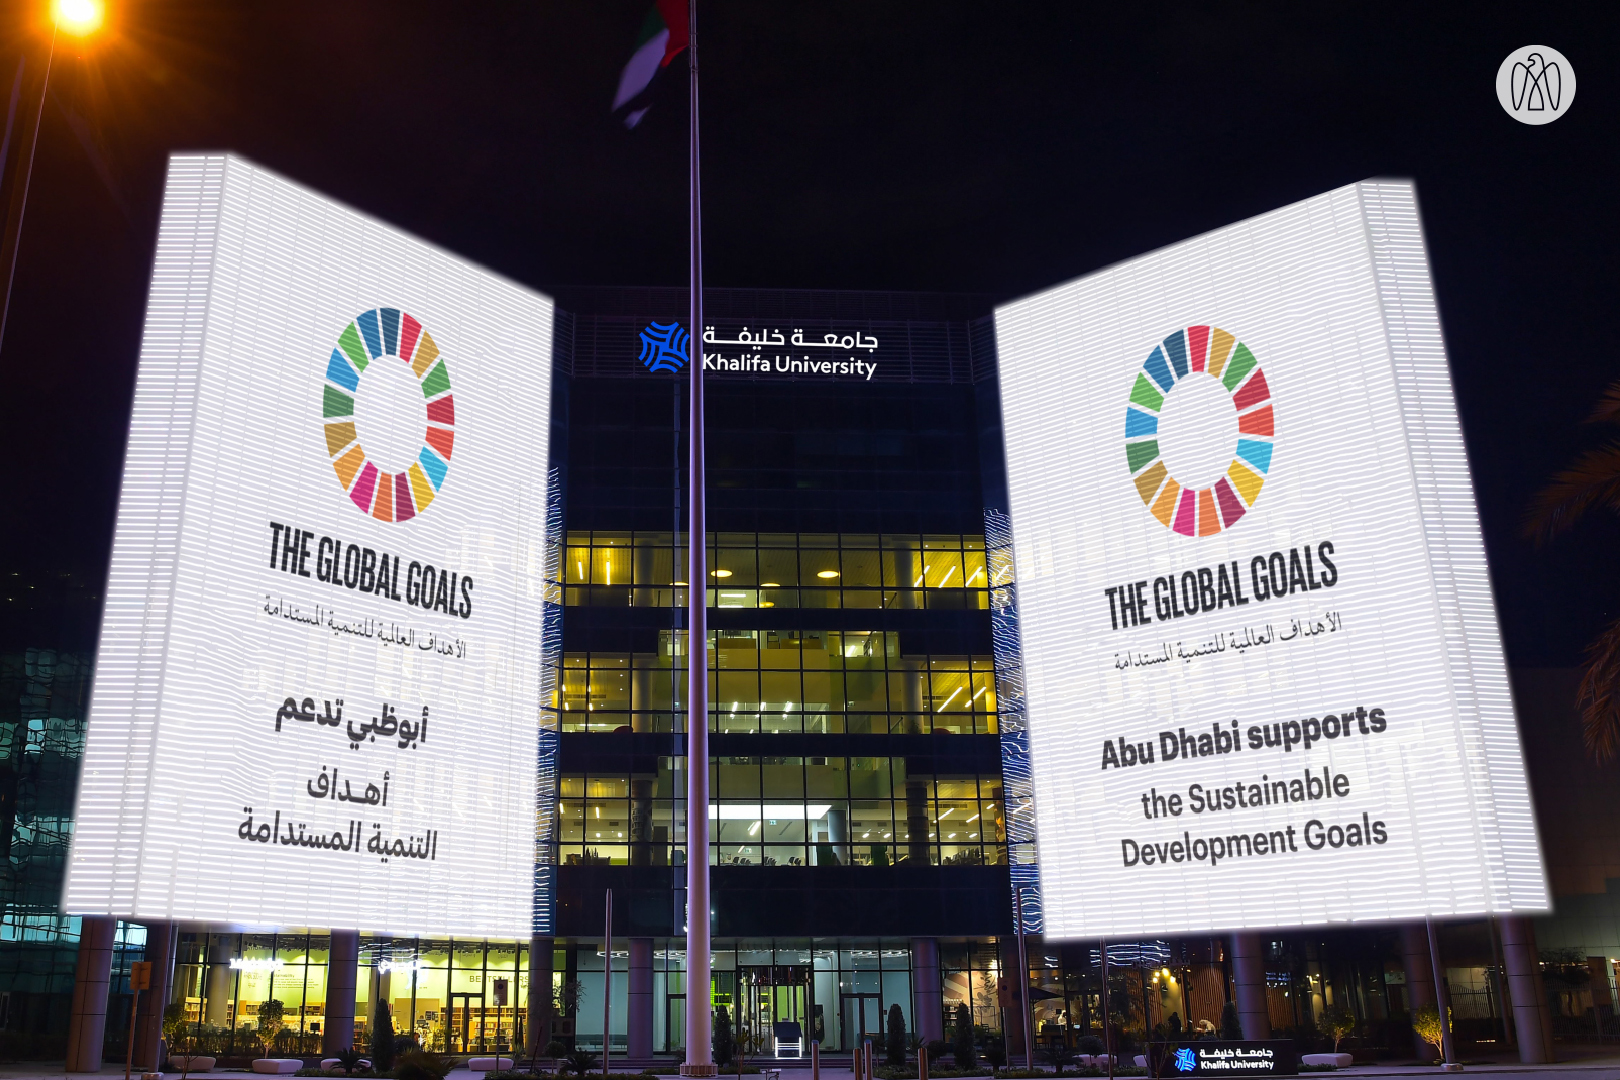 Abu Dhabi’s Iconic Buildings To Light Up With The ‘Global Goals’ Logo